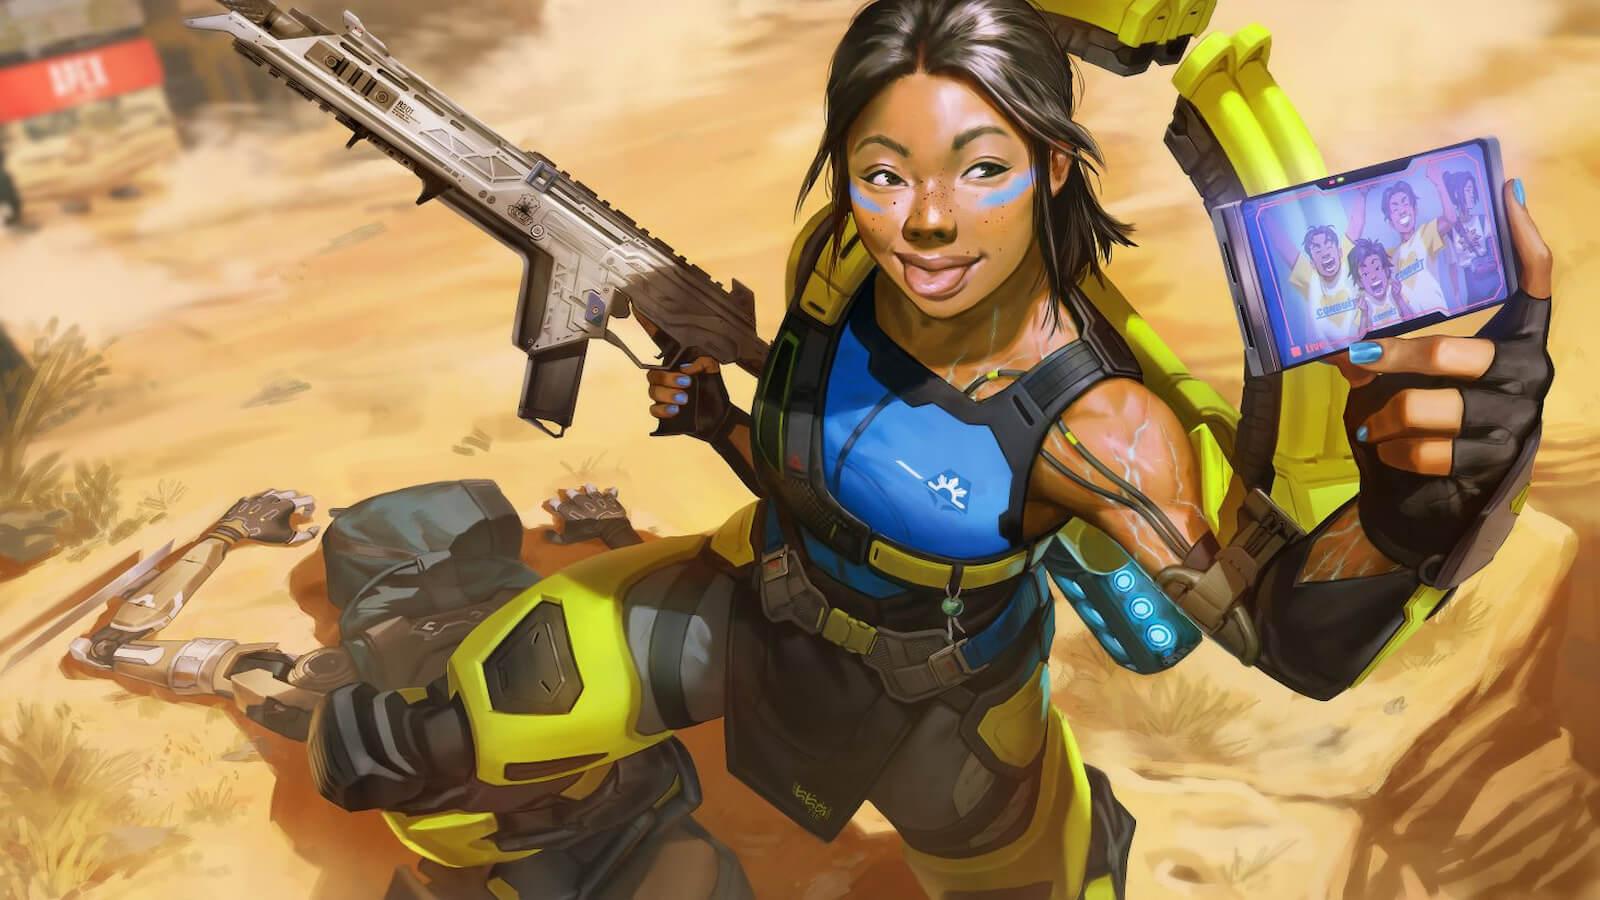 Apex Legends players are loving Conduit’s character selection impersonations